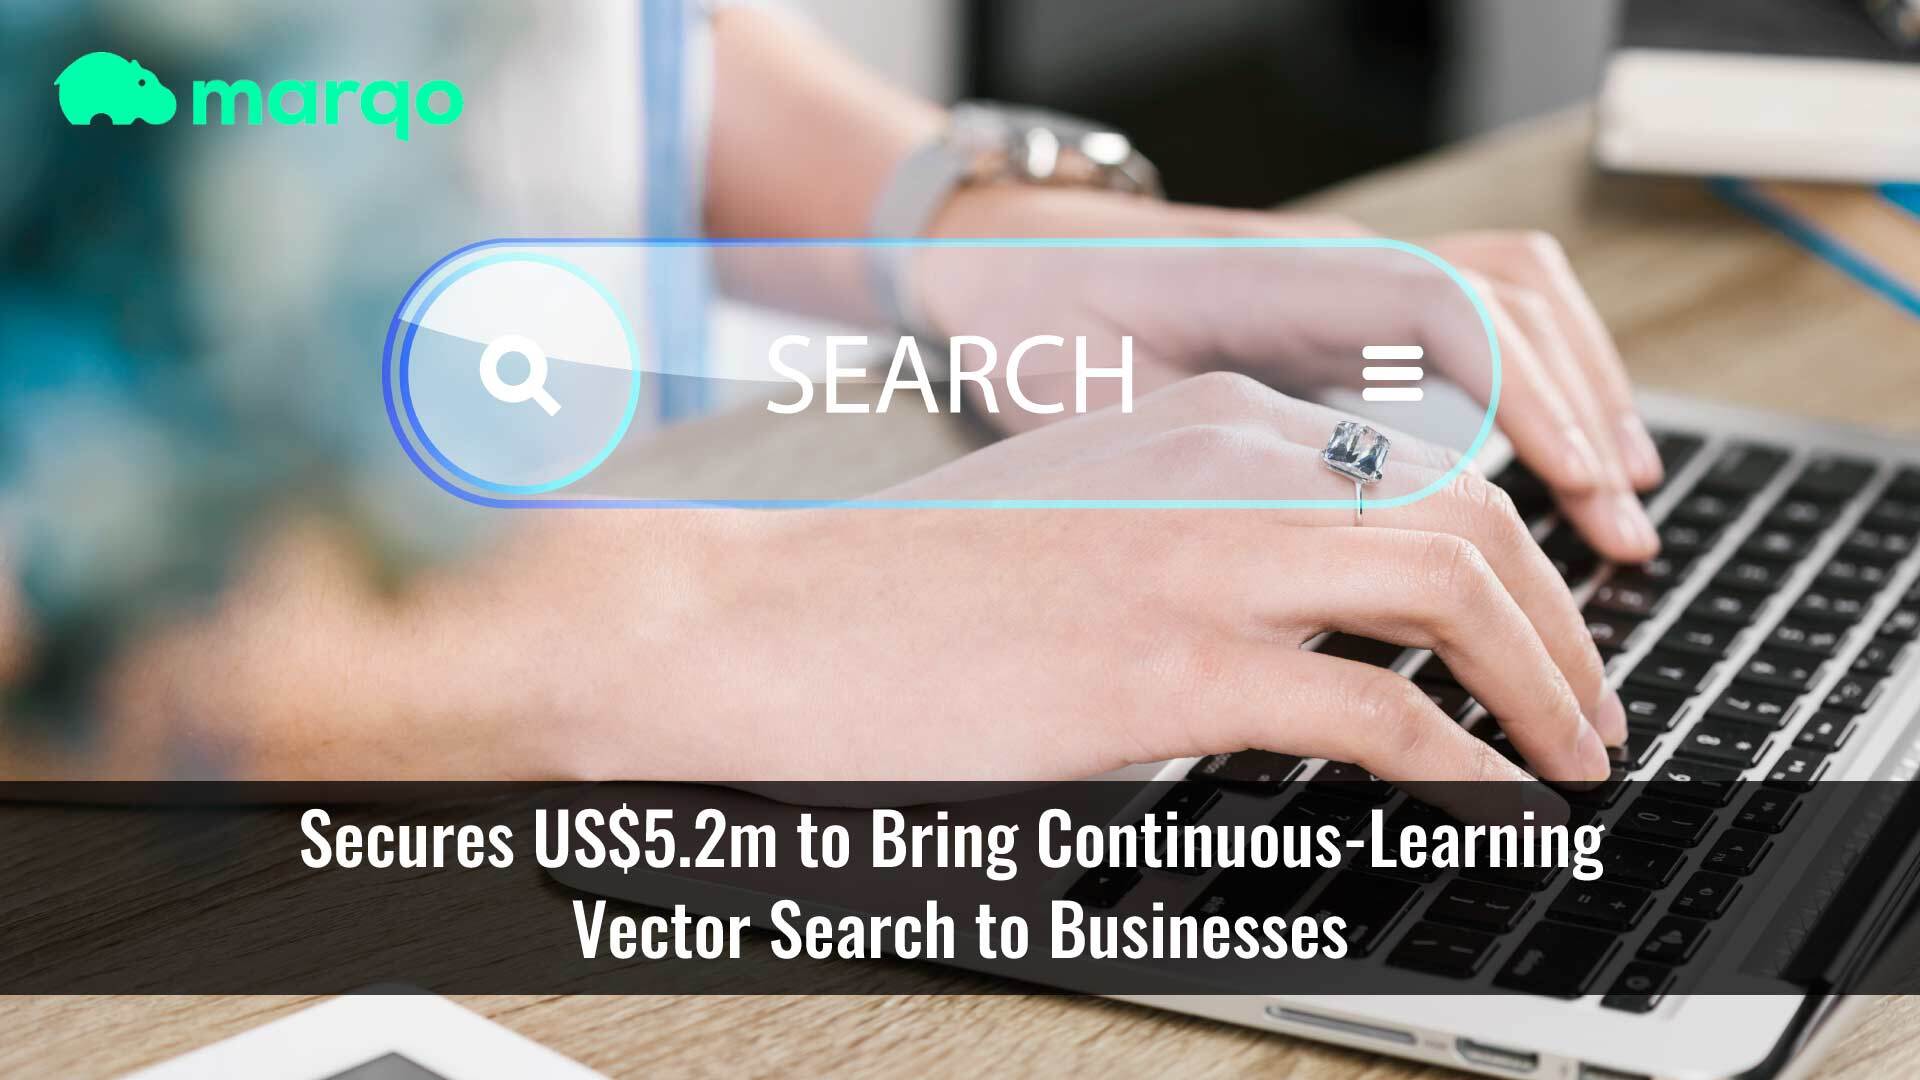 Marqo Secures US$5.2m to Bring Continuous-Learning Vector Search to Businesses